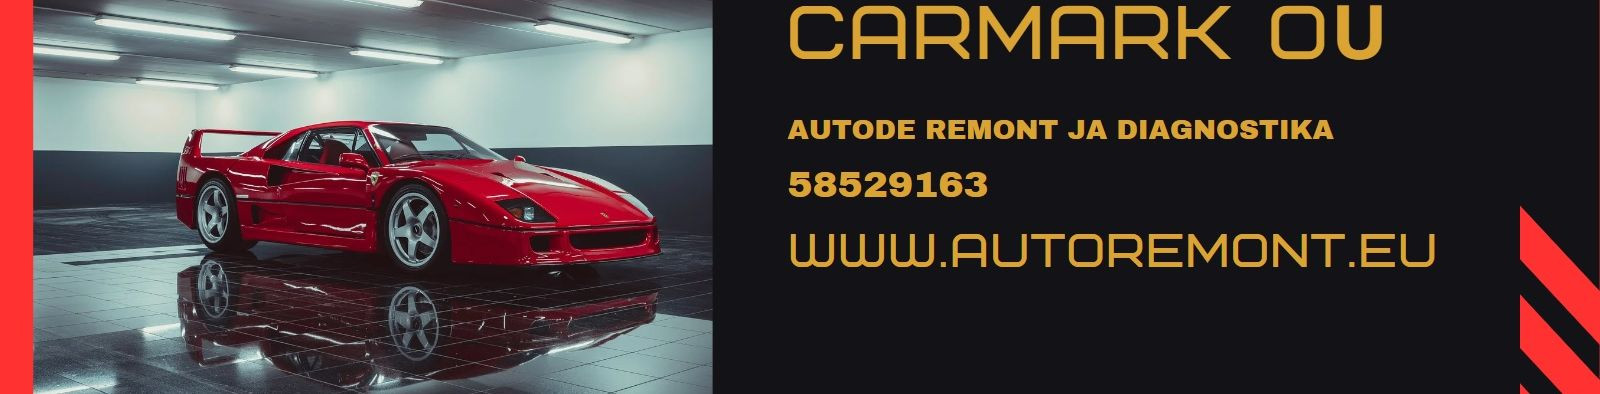 adjusting the chassis, gearbox repair, tyrework, Engine repair, car tuning, INSTALLATION OF LEDBAR OR MAIN LIGHT, CHASSIS REPAIR, POLISHING OF LIGHTS AND DETAILS, CORRECTION OF DETAILS, Startup help